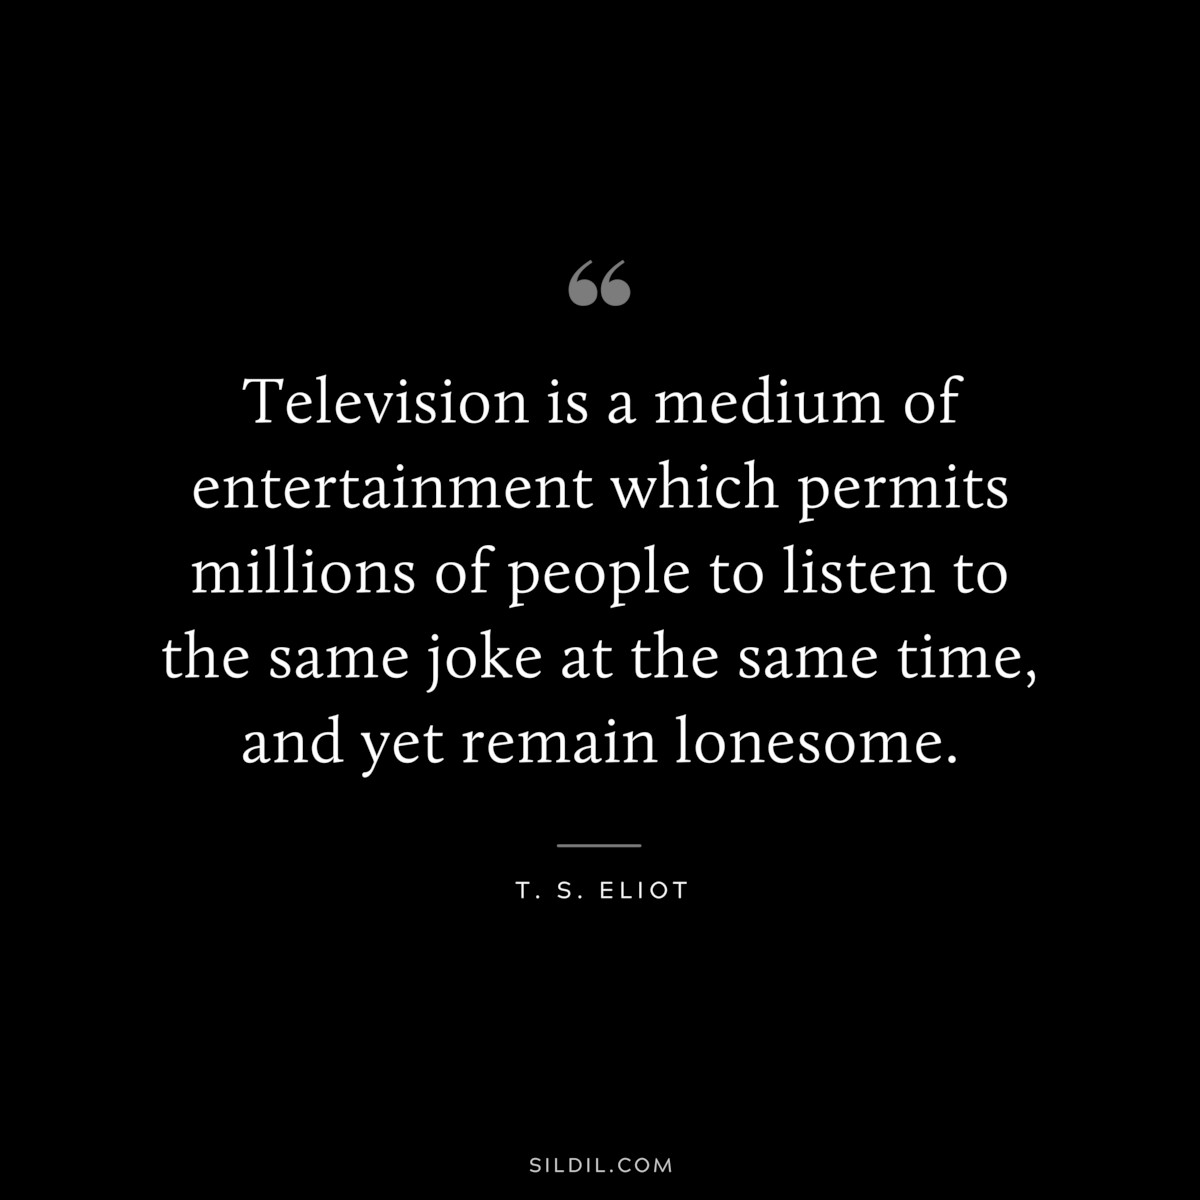 Television is a medium of entertainment which permits millions of people to listen to the same joke at the same time, and yet remain lonesome. ― T. S. Eliot